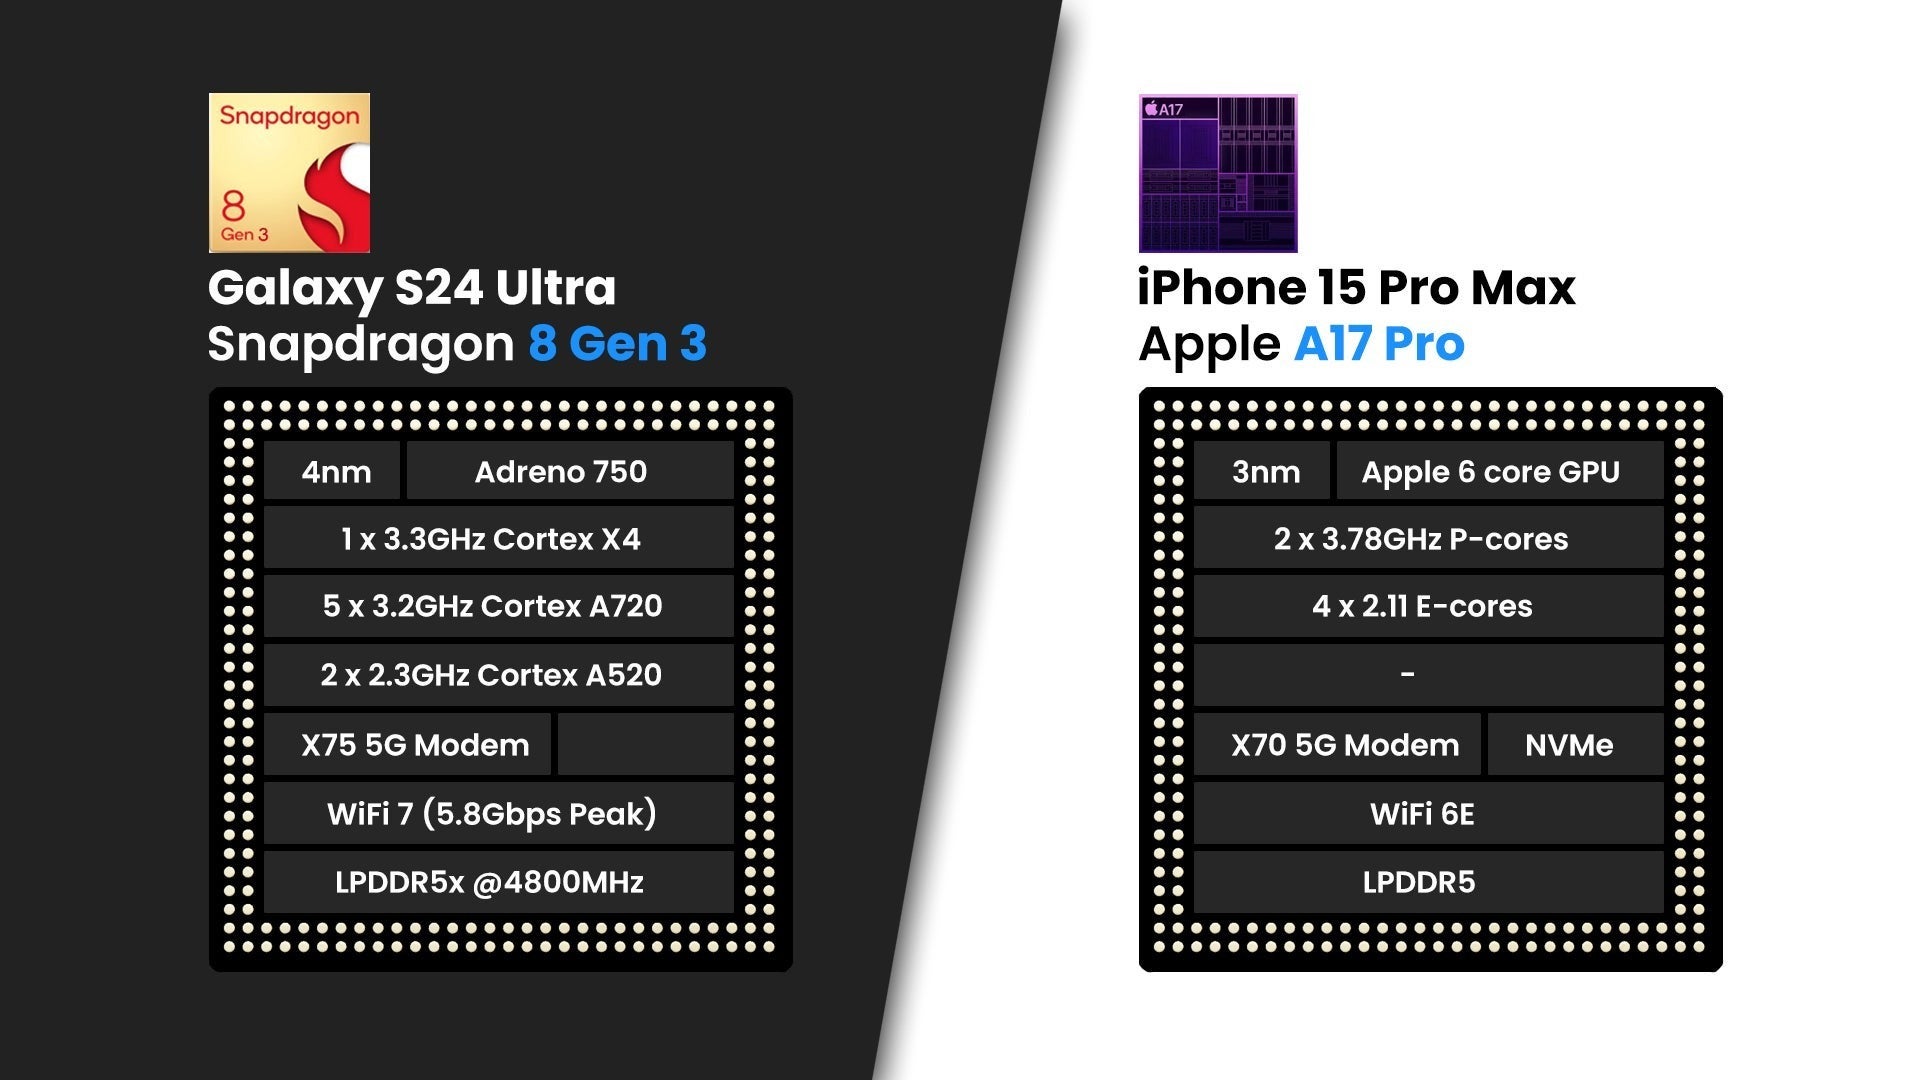 The specifications of the S24 Ultra 5G modem are again higher than those of the 15 Pro Max. 